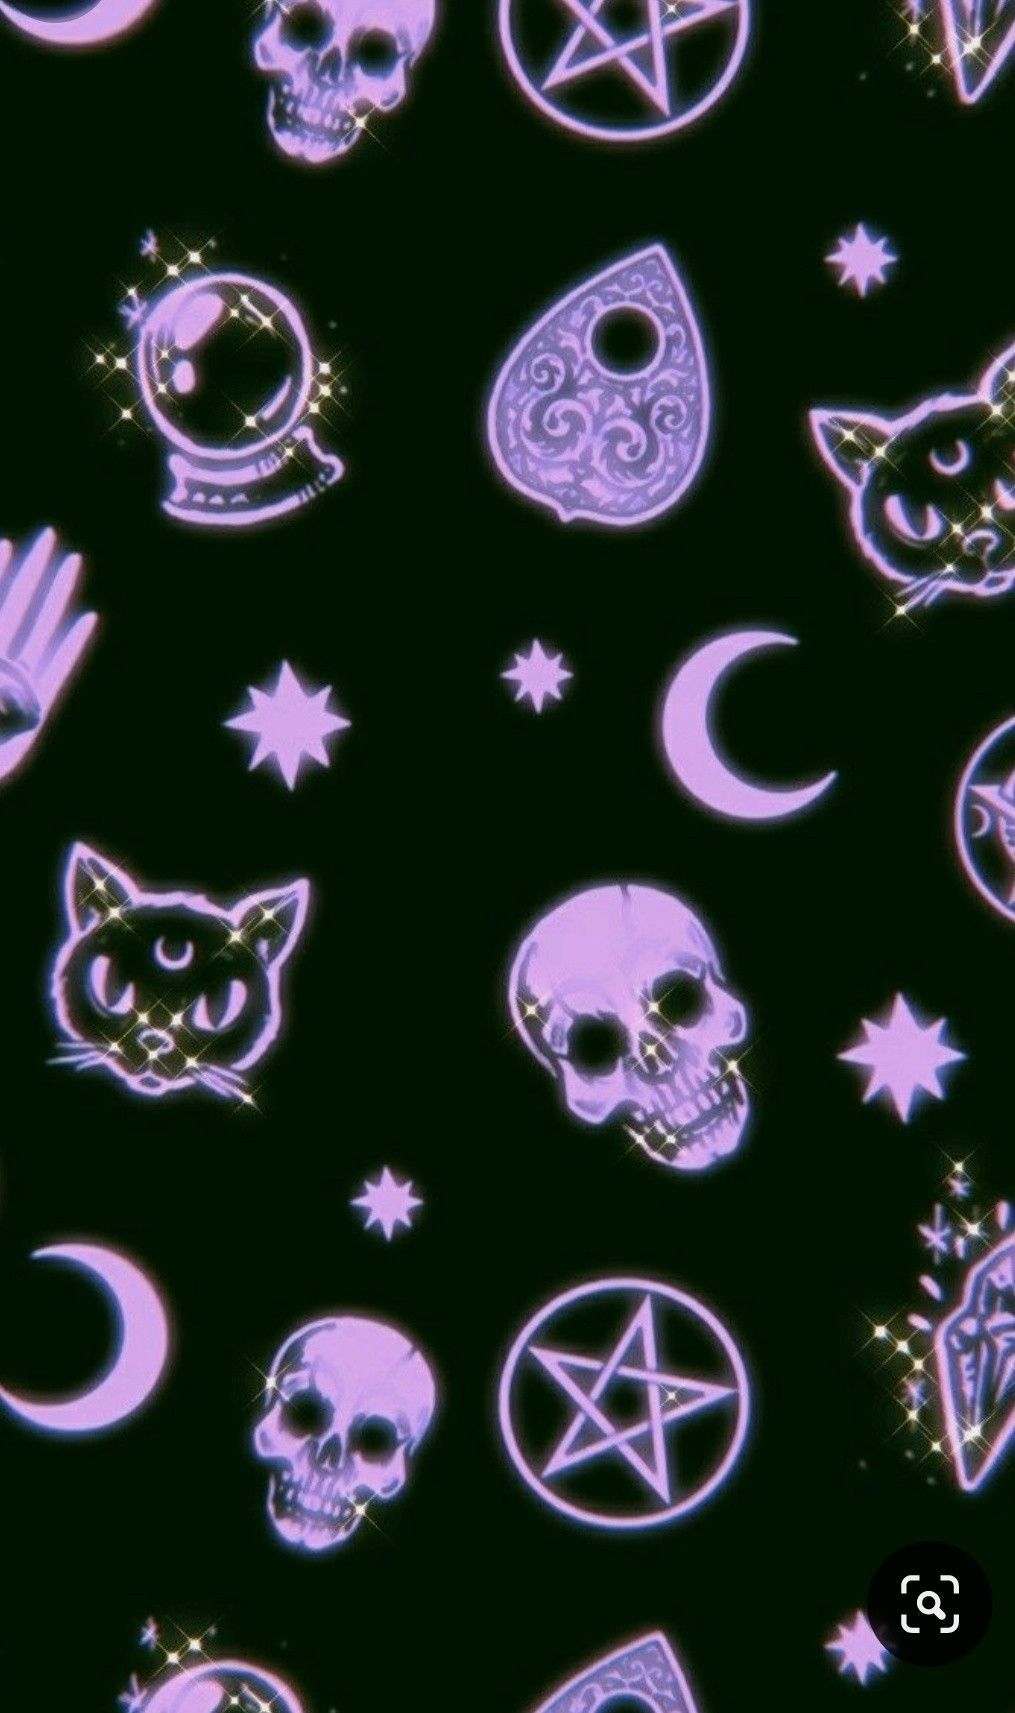 A purple and black fabric with various symbols - Creepy, spooky